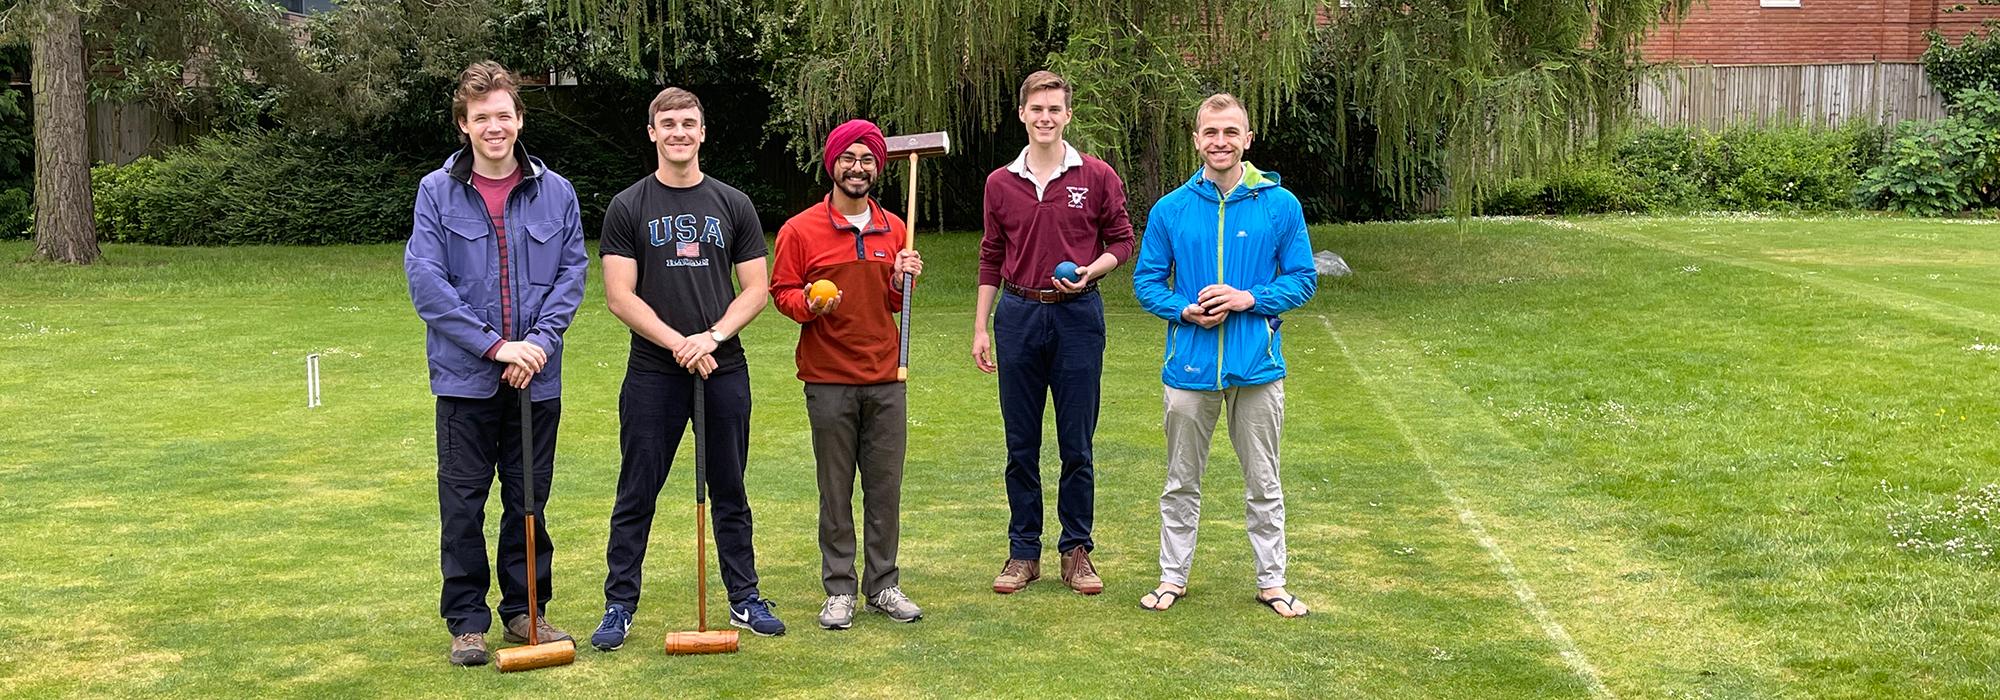 Henry Grub (2016), Elliott Thornley (2019), Kabir Bakshi (2020, with orb and sceptre), Charles Tolkien-Gillett (2019) and Matthew Lennon (2020) at the Cuppers semi-finals